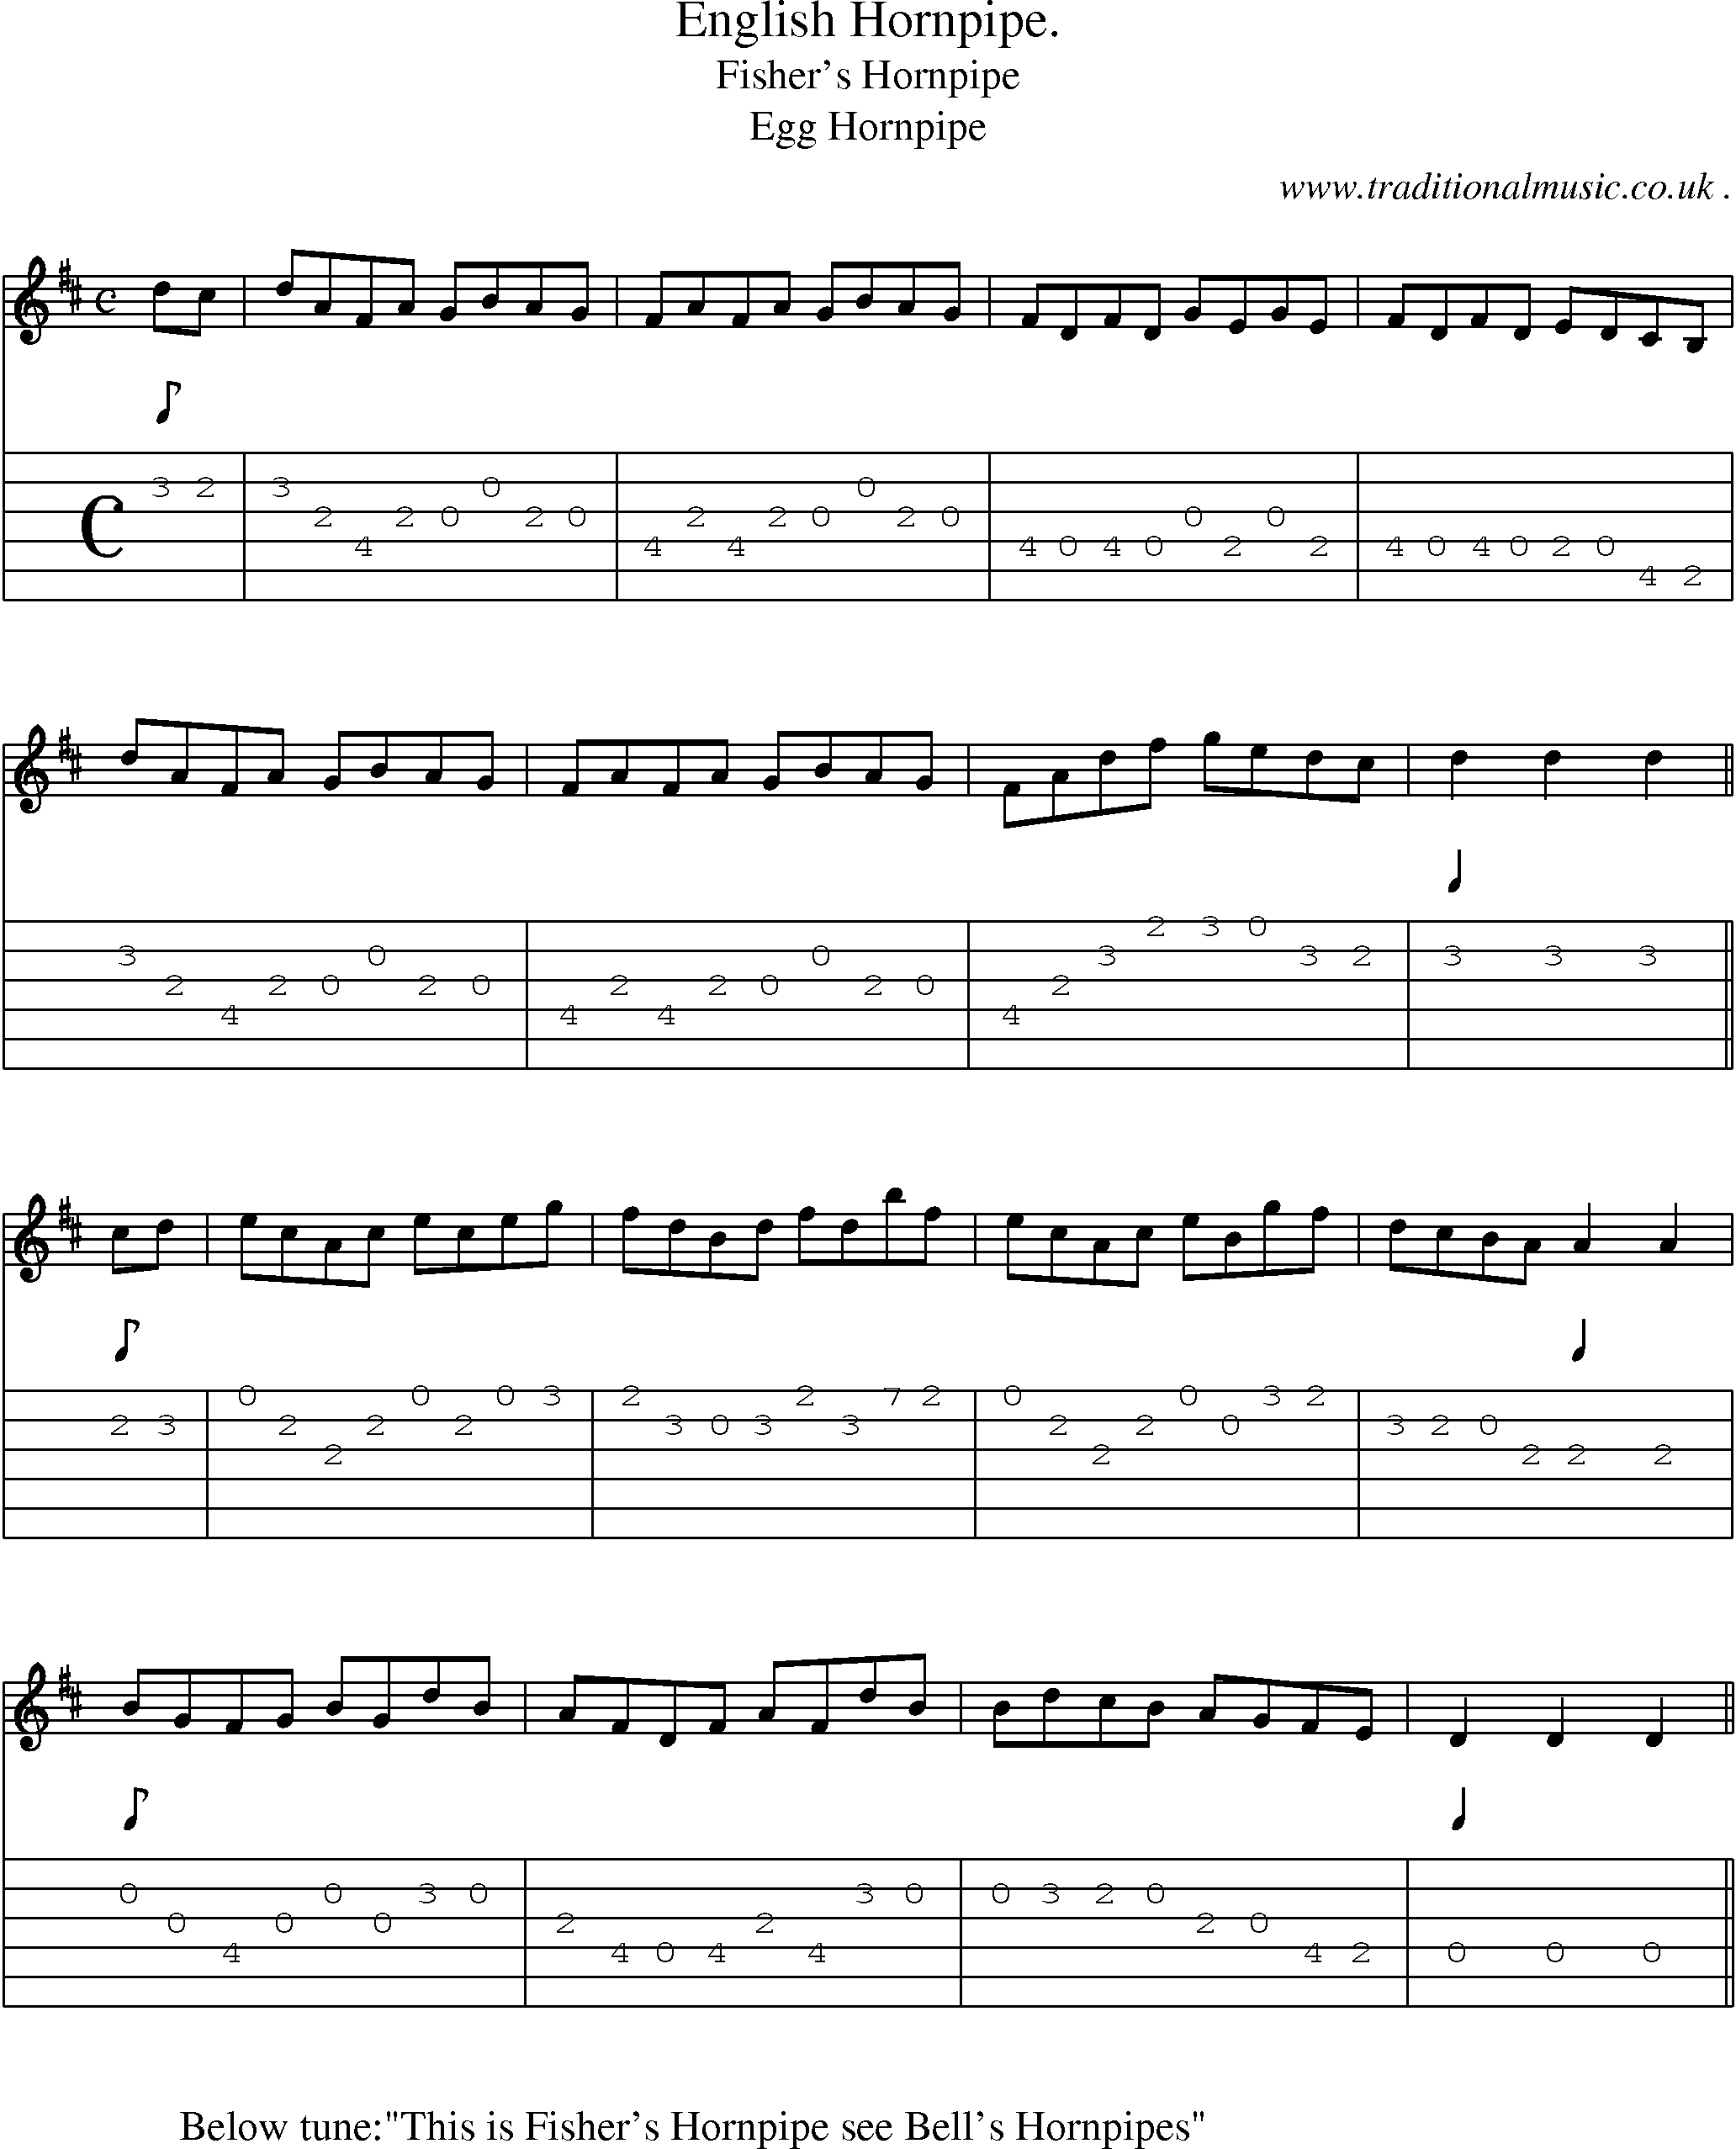 Sheet-Music and Guitar Tabs for English Hornpipe